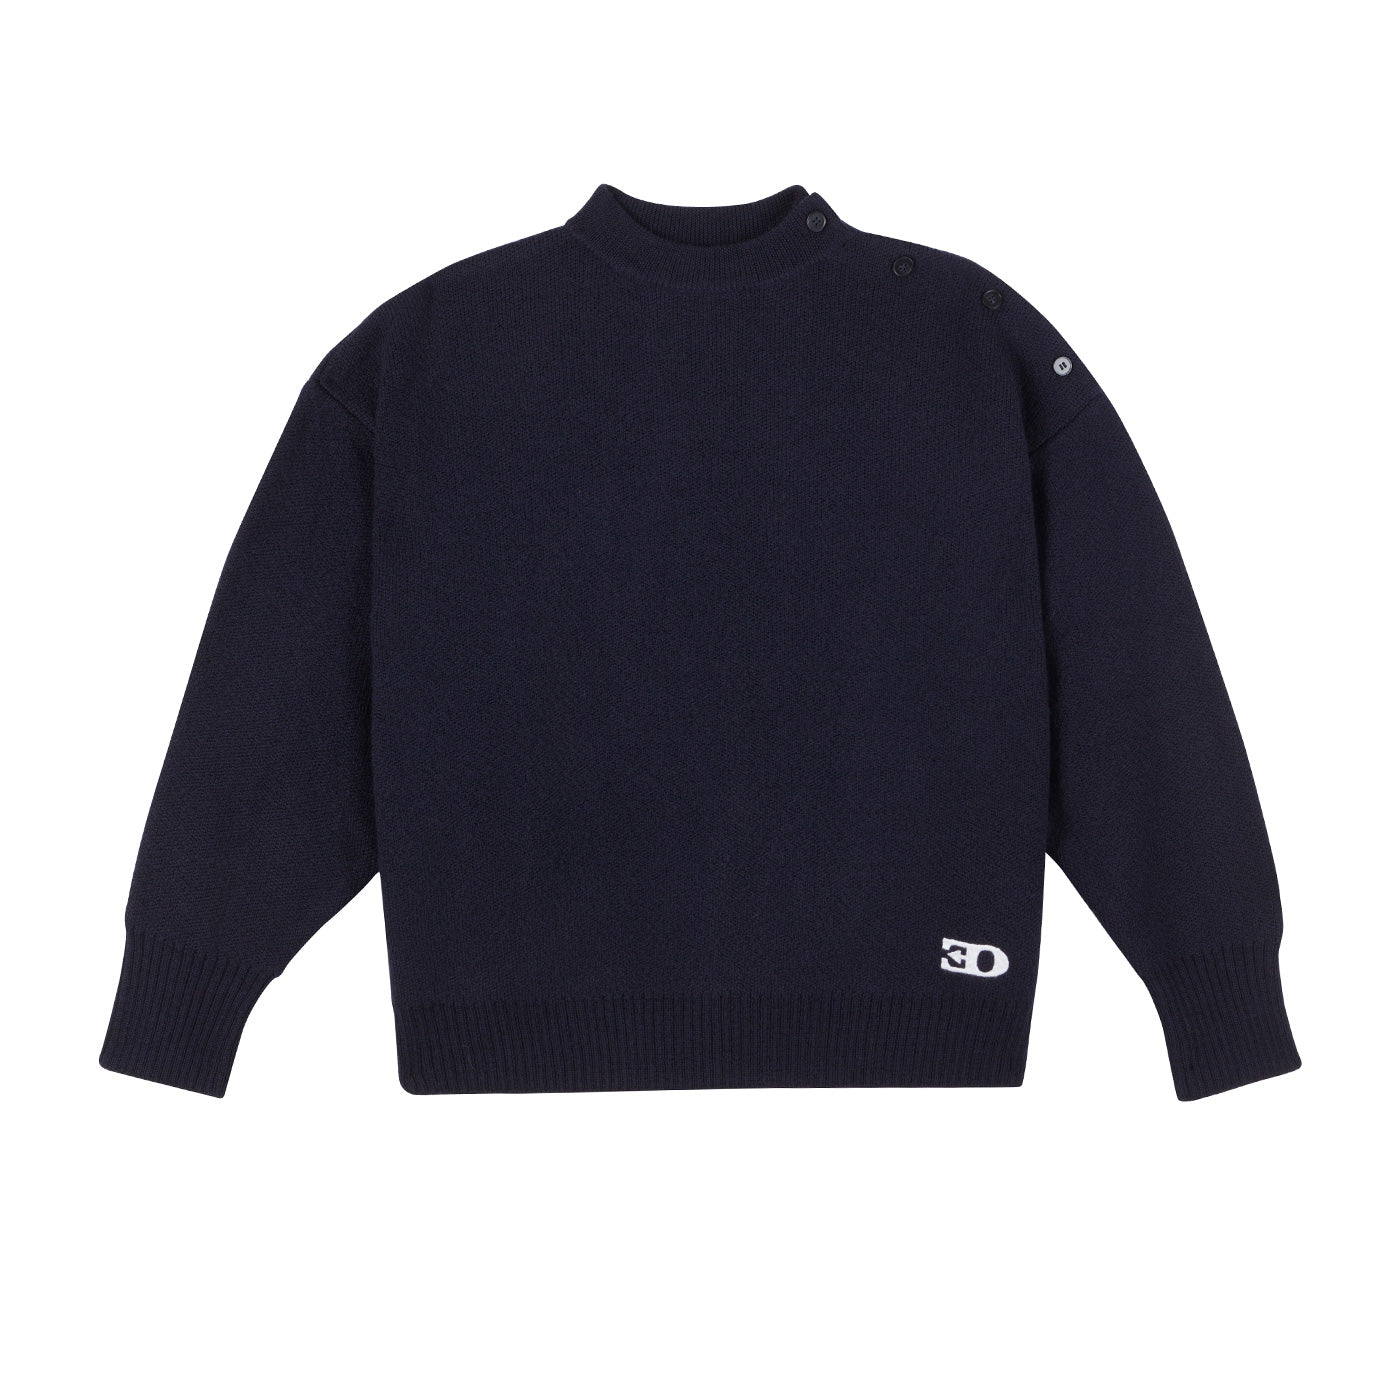 THE SAILOR JUMPER IN NAVY